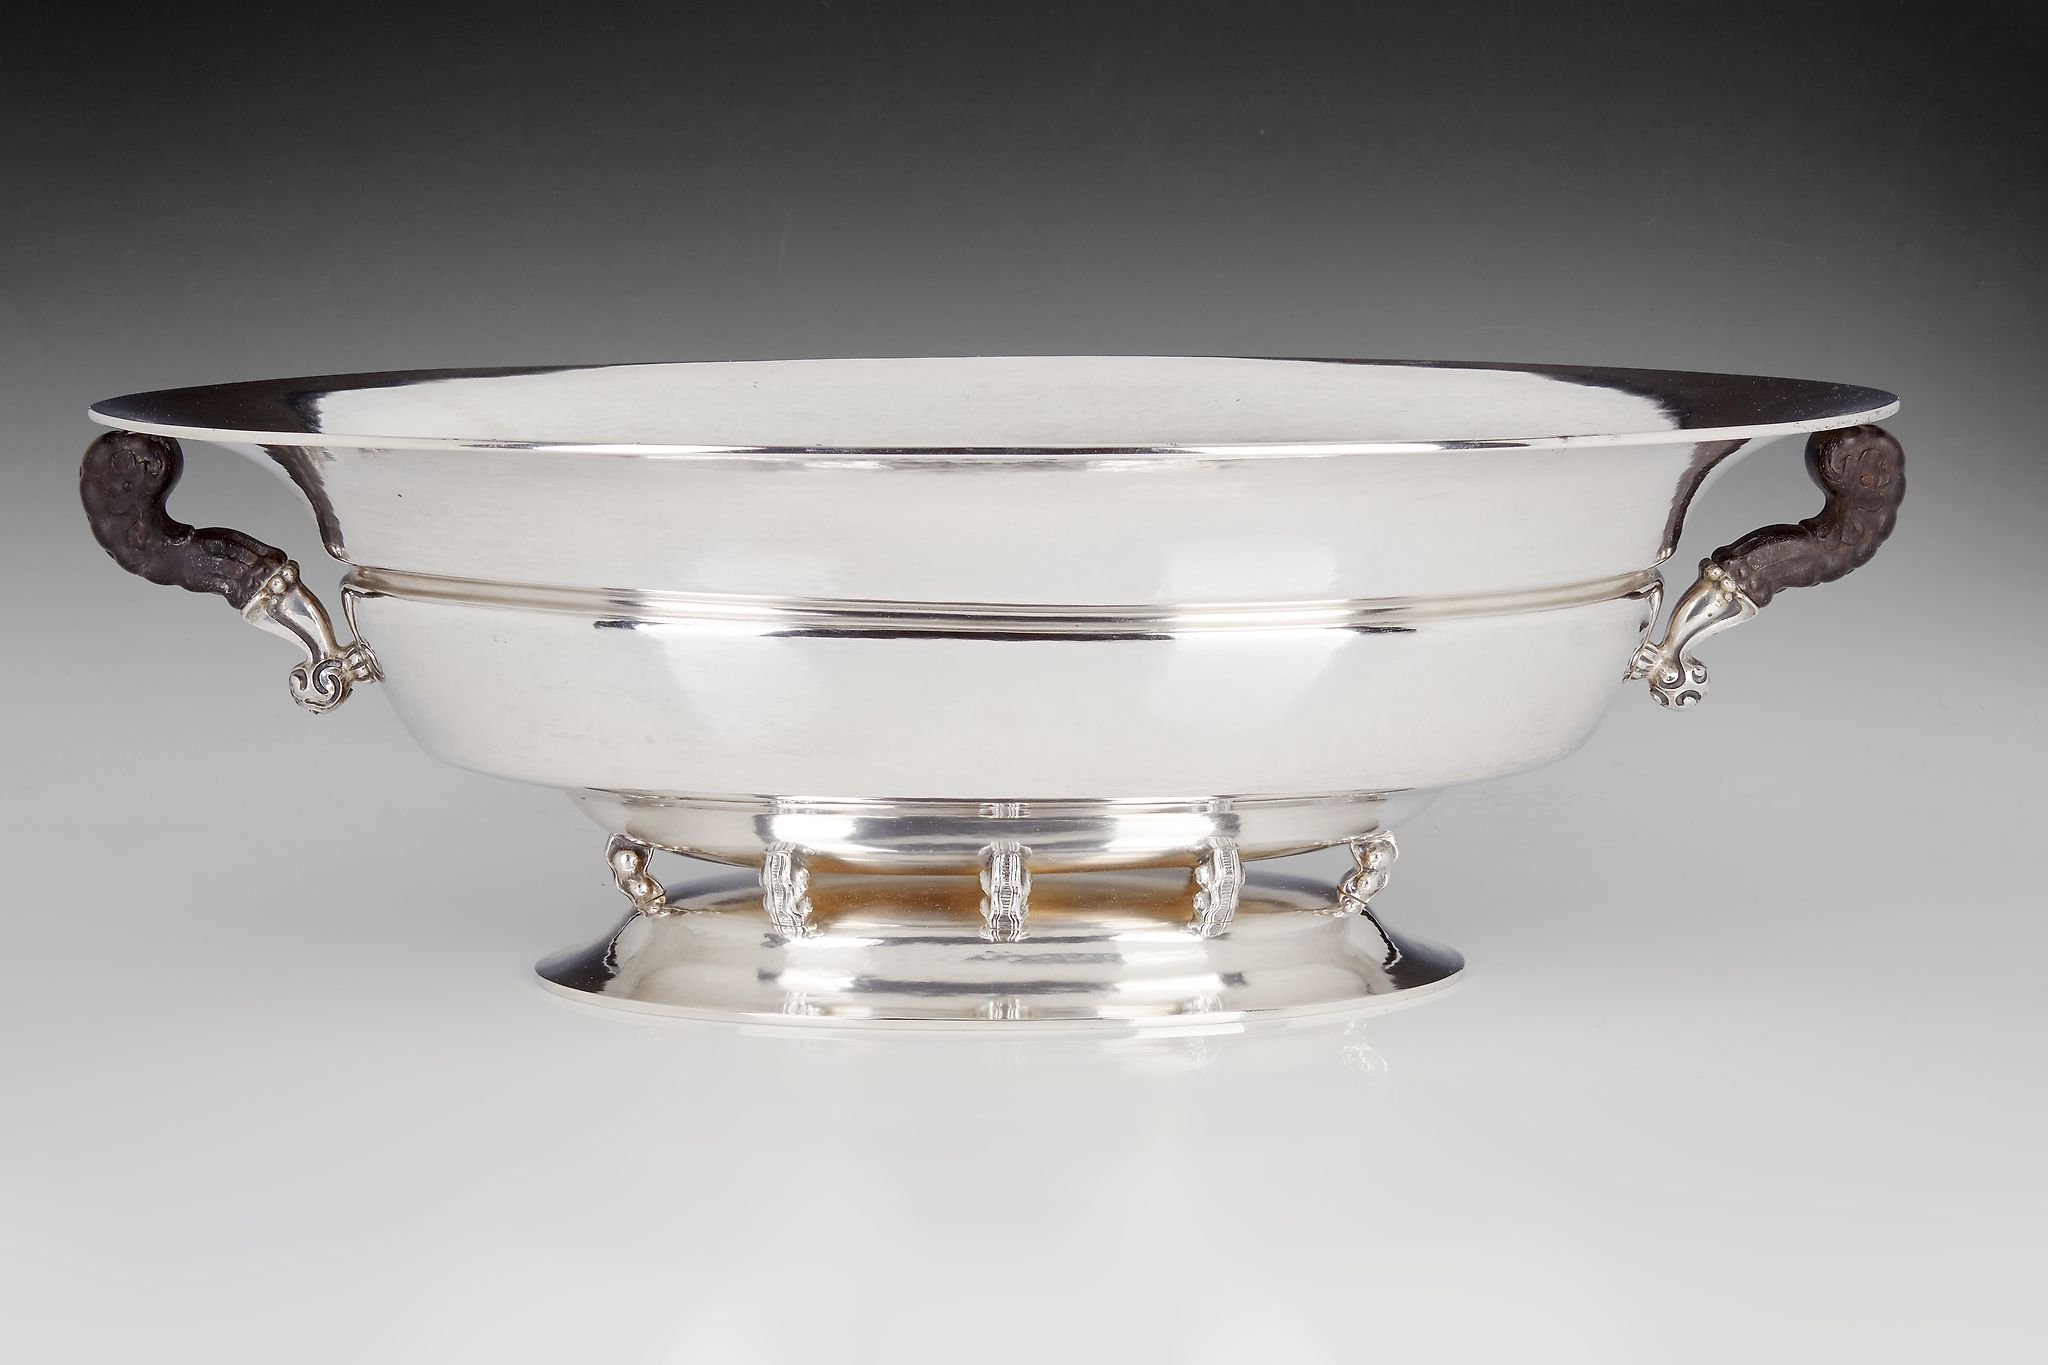 A Norwegian Arts and Crafts silver oval punch bowl by Marius Hammer, Bergen, circa 1919, .830